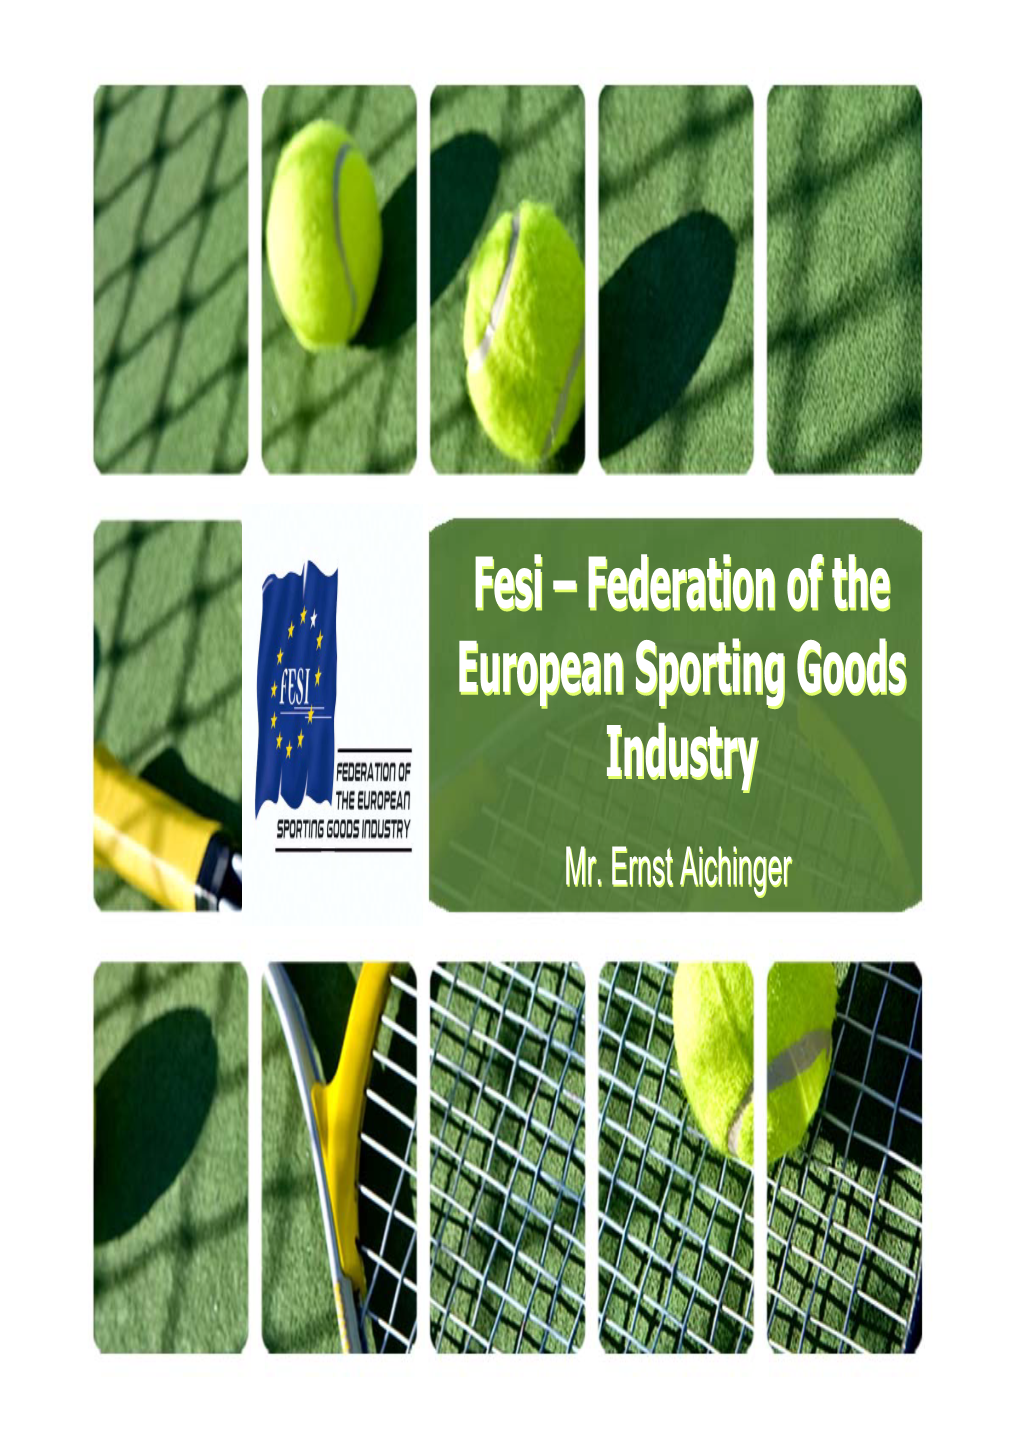 Fesi – Federation of the European Sporting Goods Industry